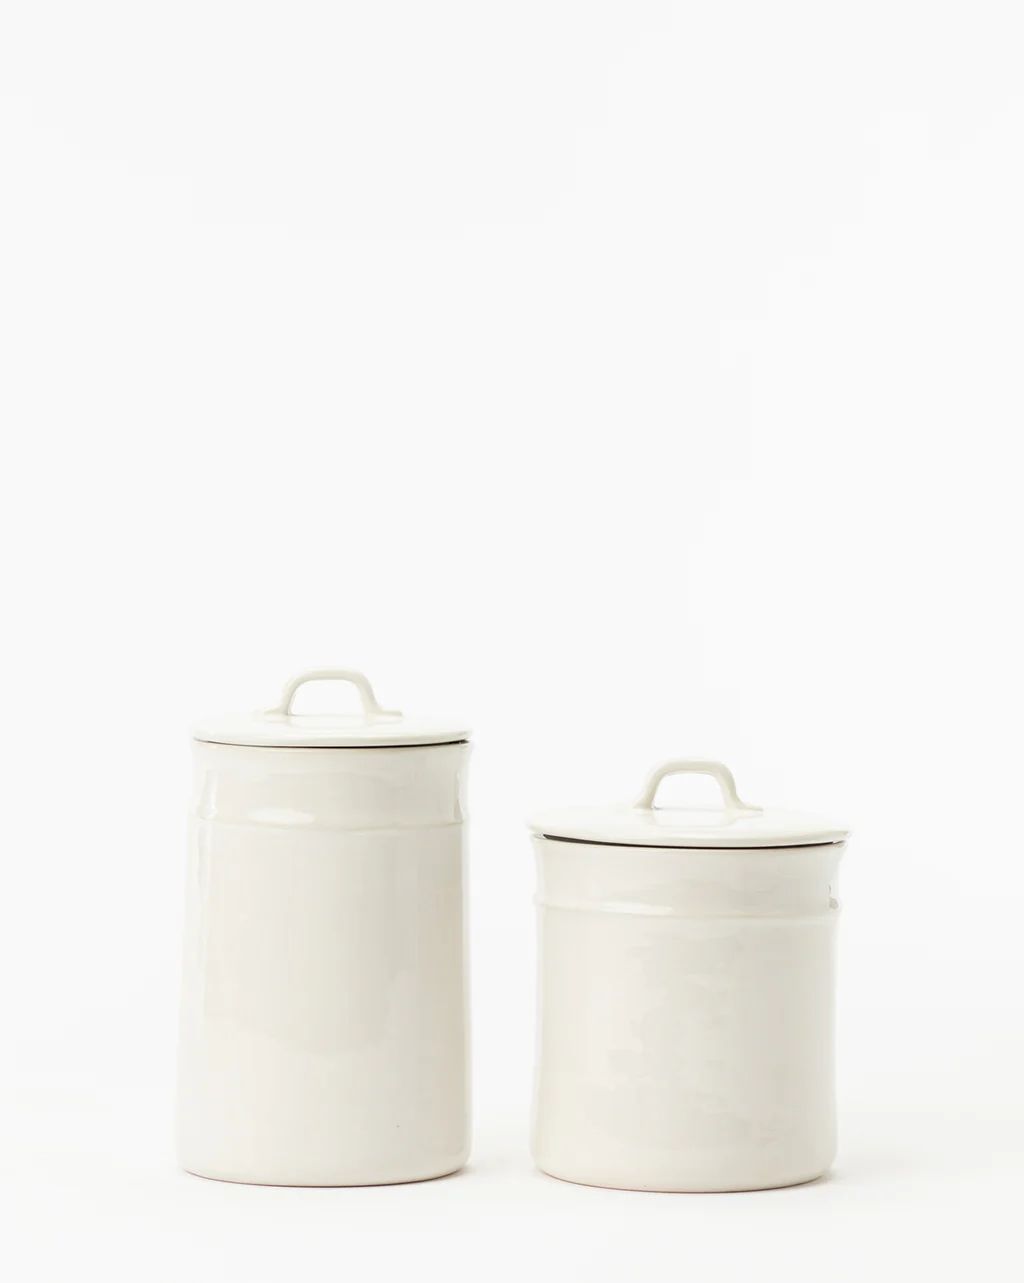 Handled Ceramic Canister | McGee & Co.